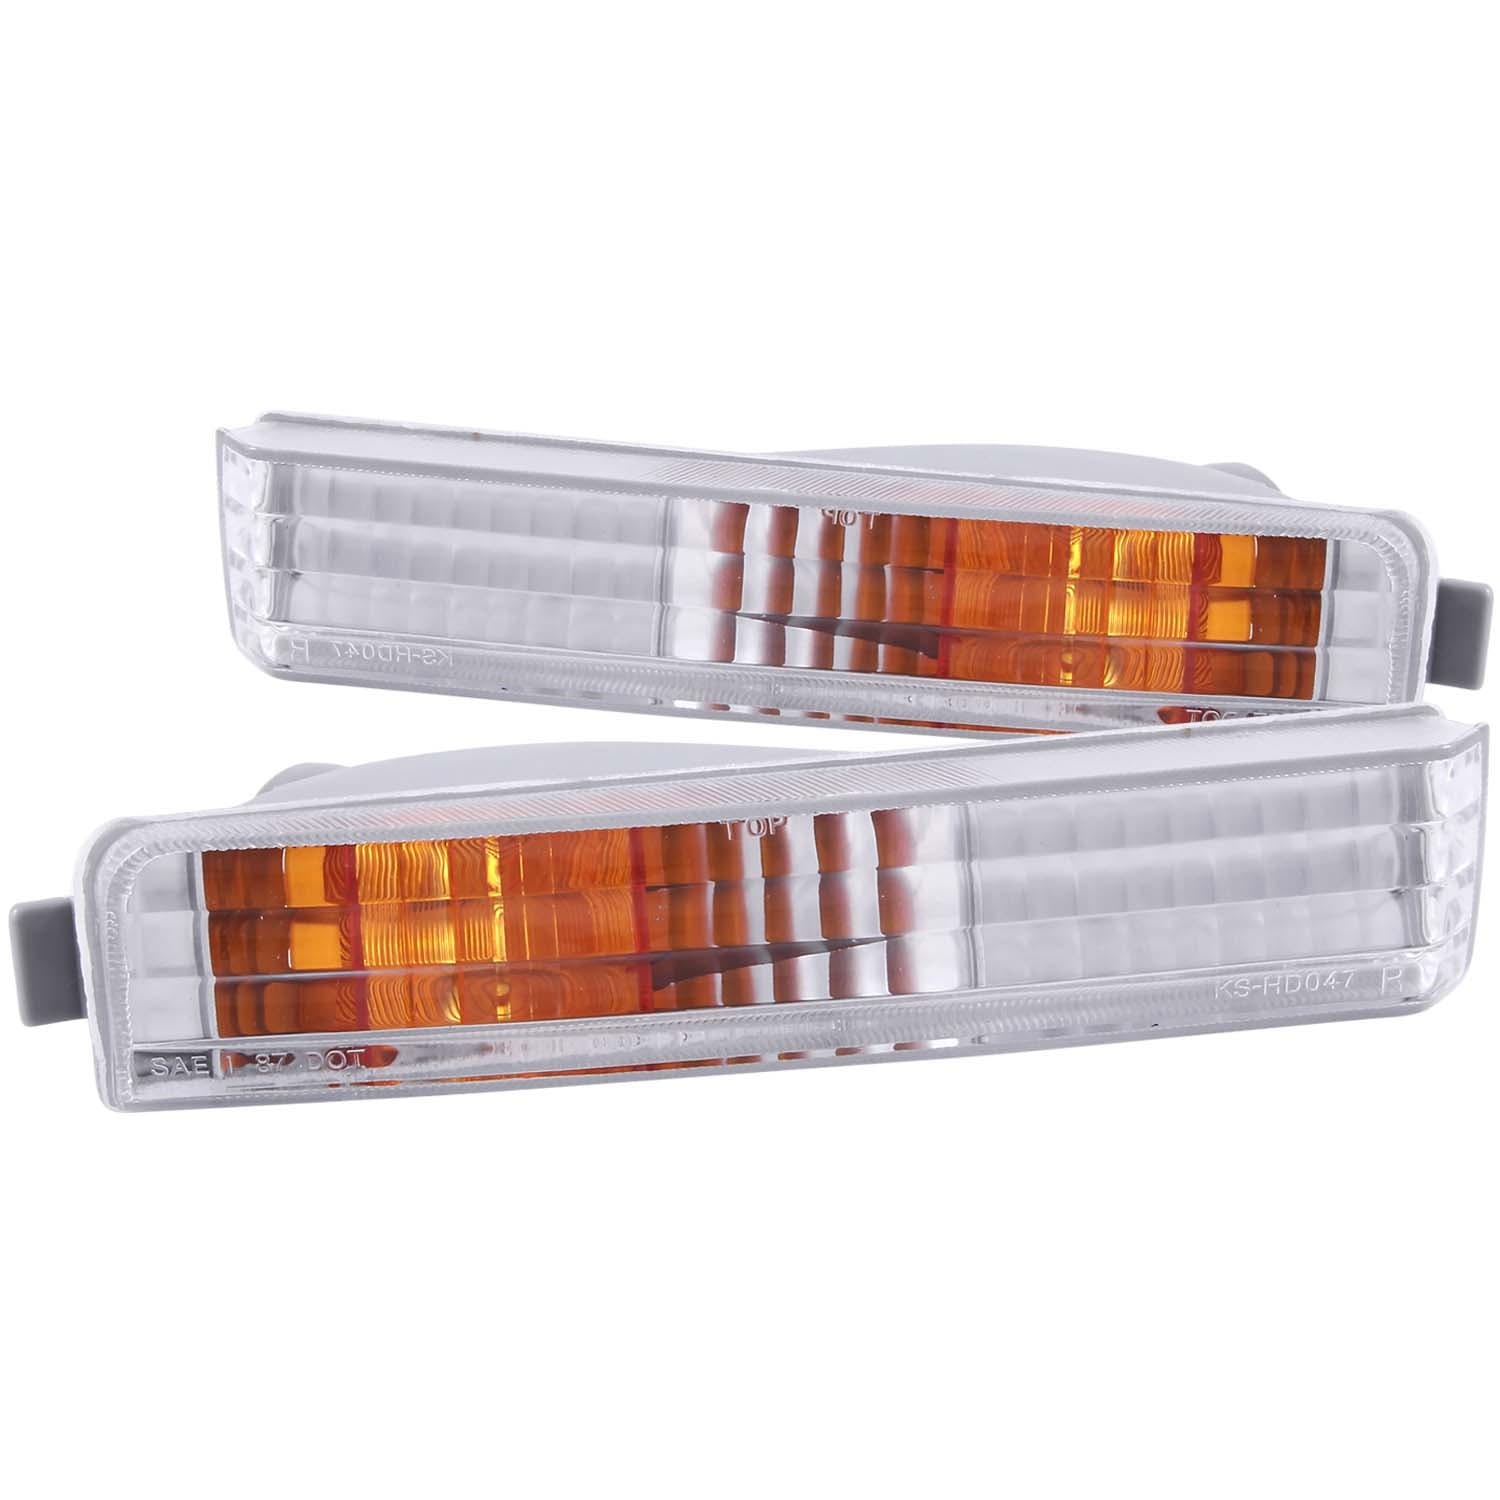 AnzoUSA 511006 Euro Parking Lights Chrome with Amber Reflector